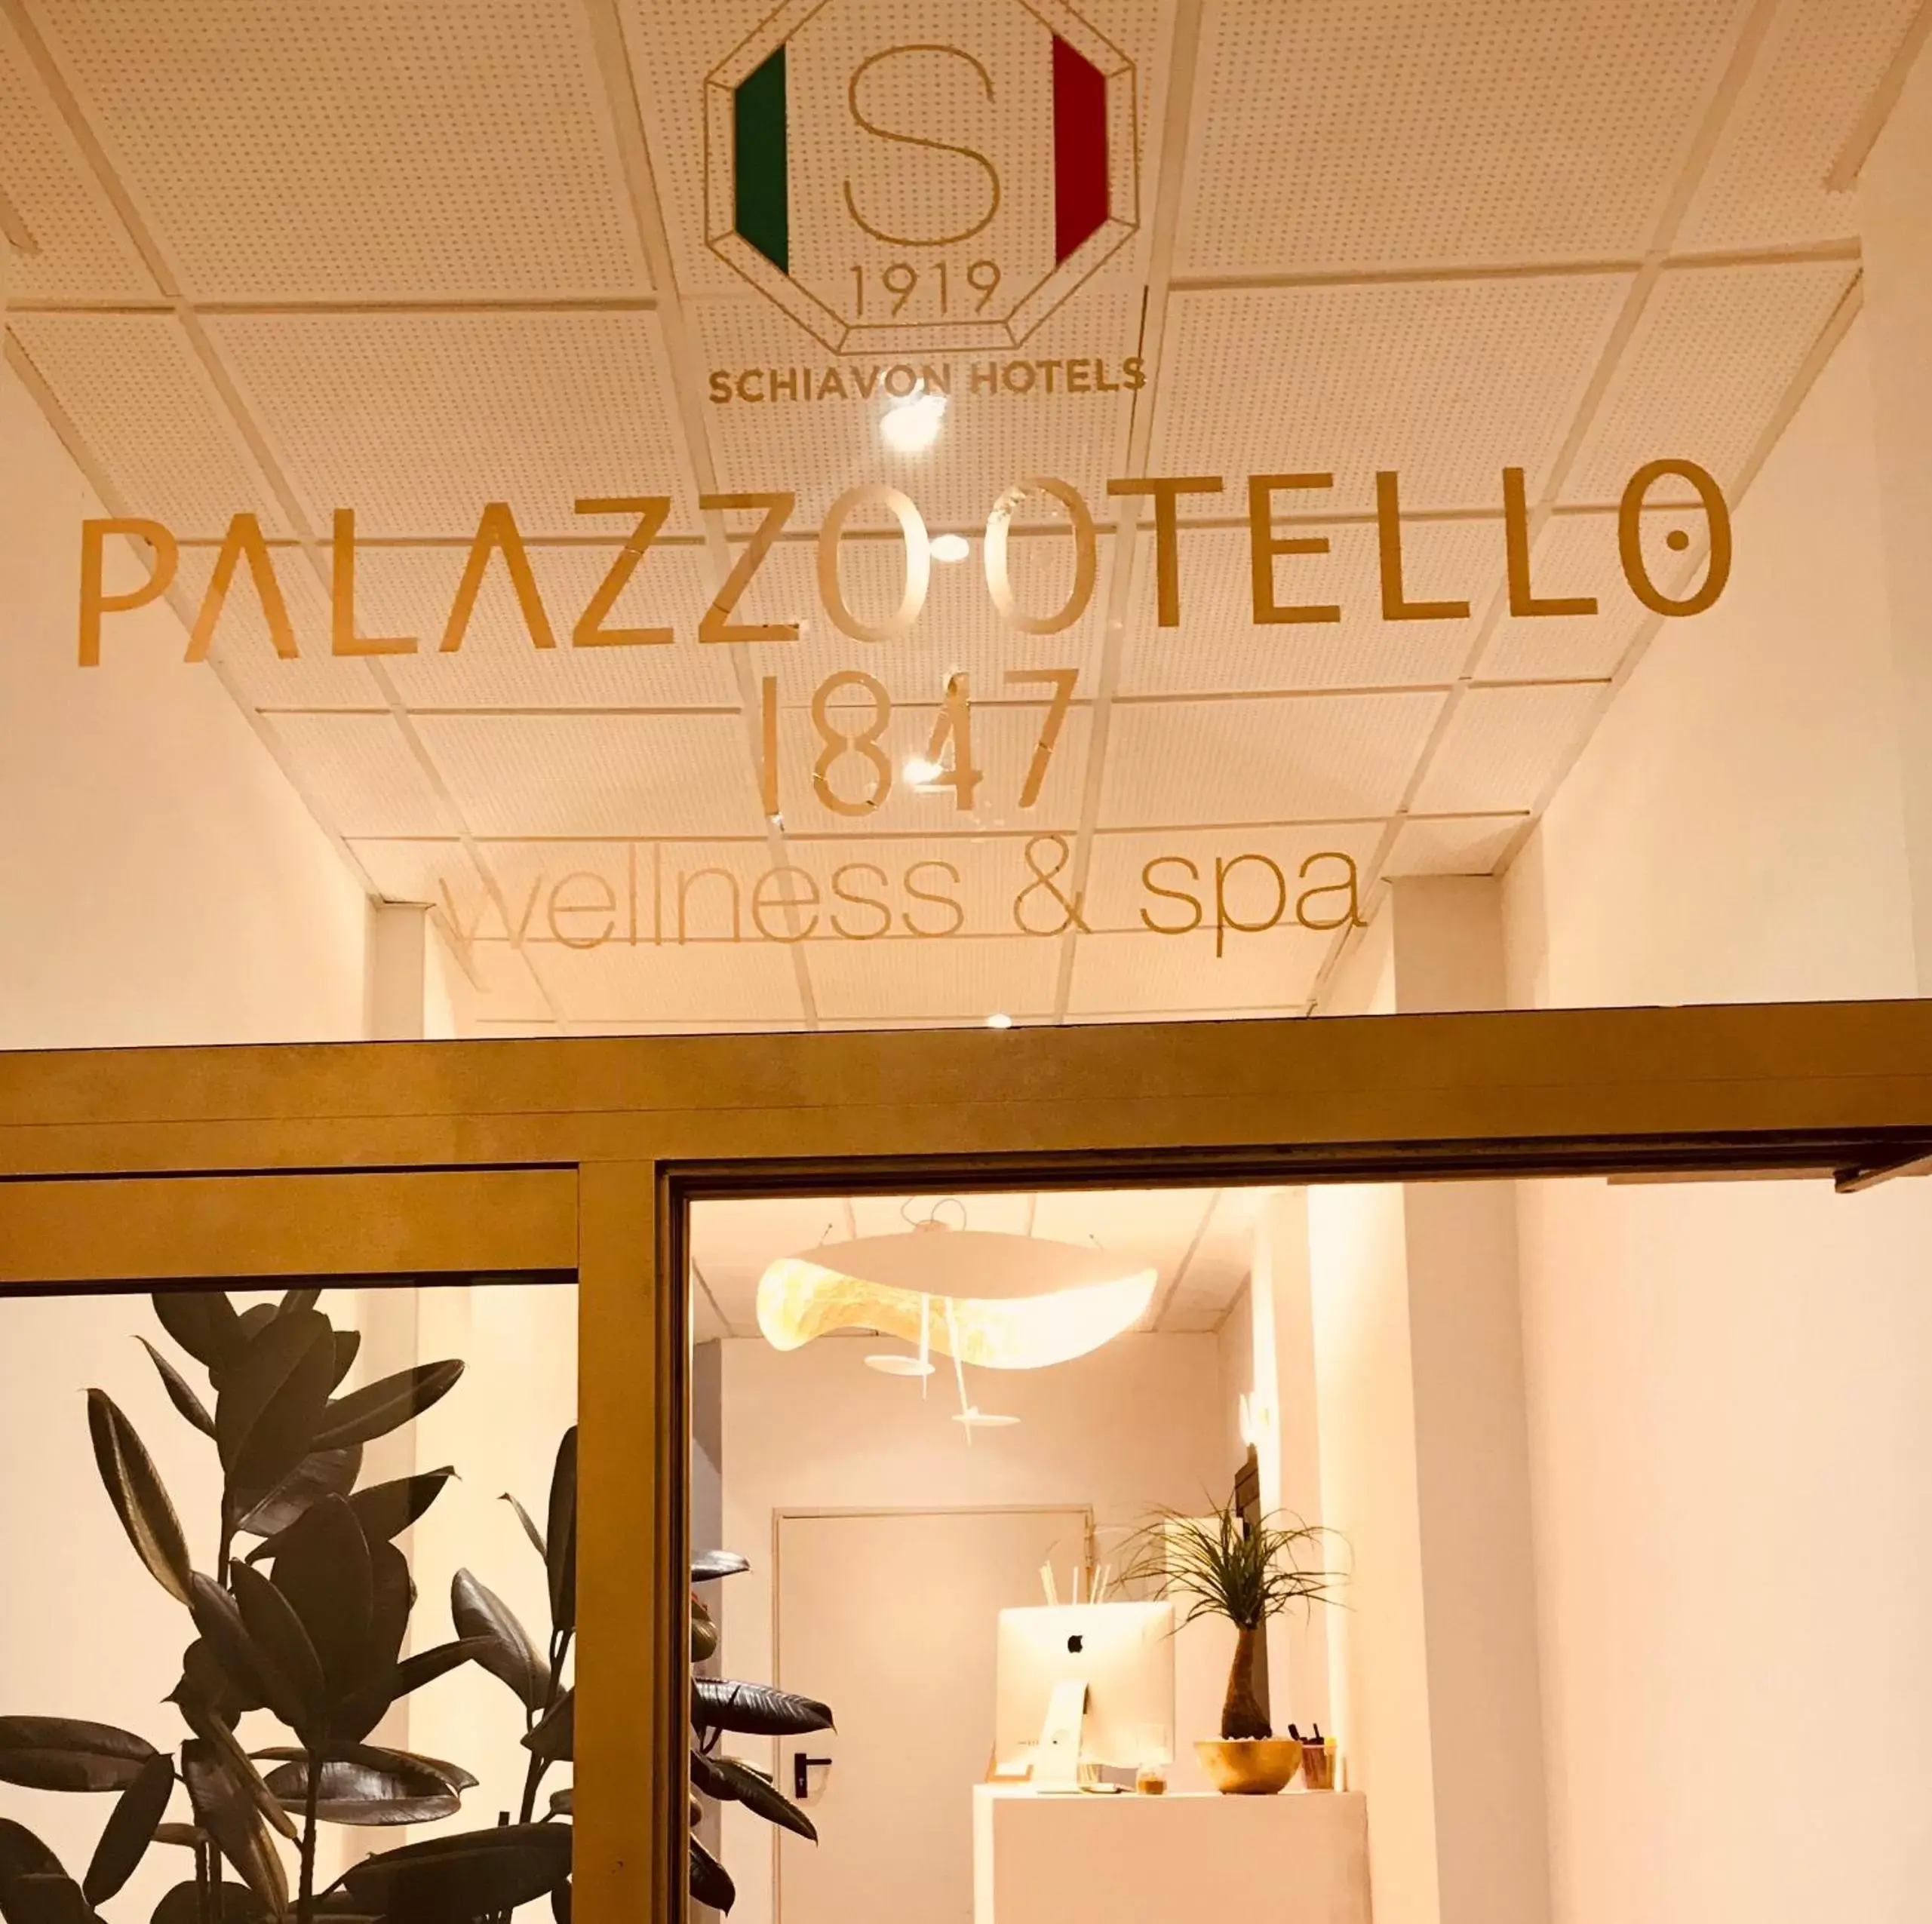 Property logo or sign in Palazzo Otello 1847 Wellness & Spa